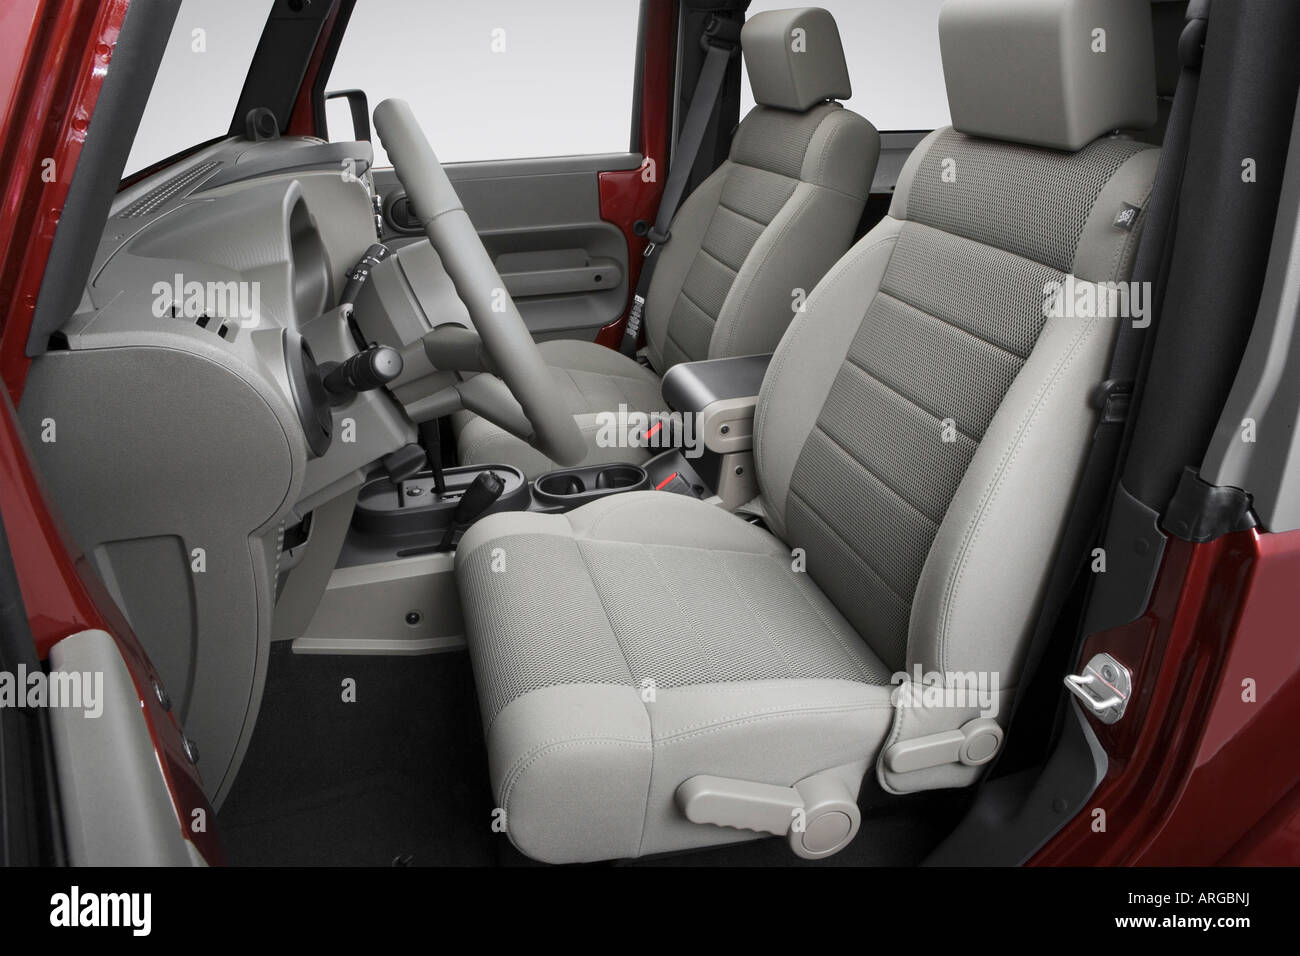 2007 Jeep Wrangler Sahara in Red - Front seats Stock Photo - Alamy